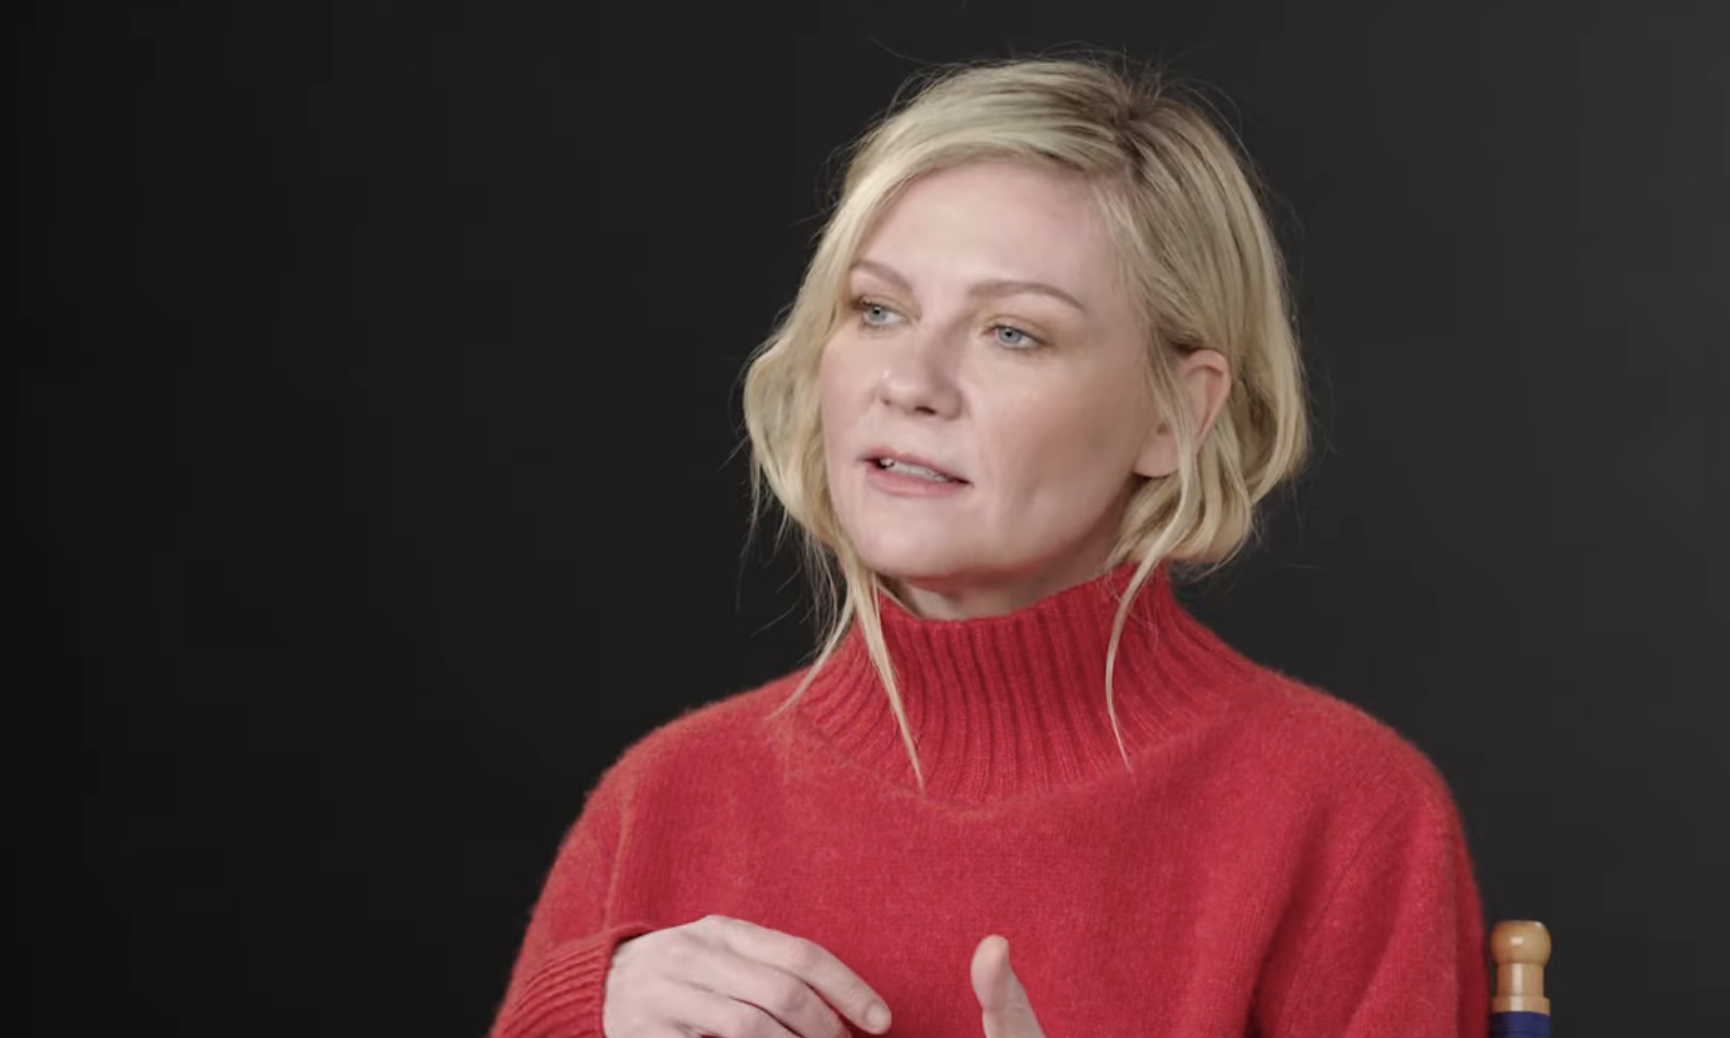 Kristen Dunst in a red turtleneck, discussing a role, in a Youtube video screenshot